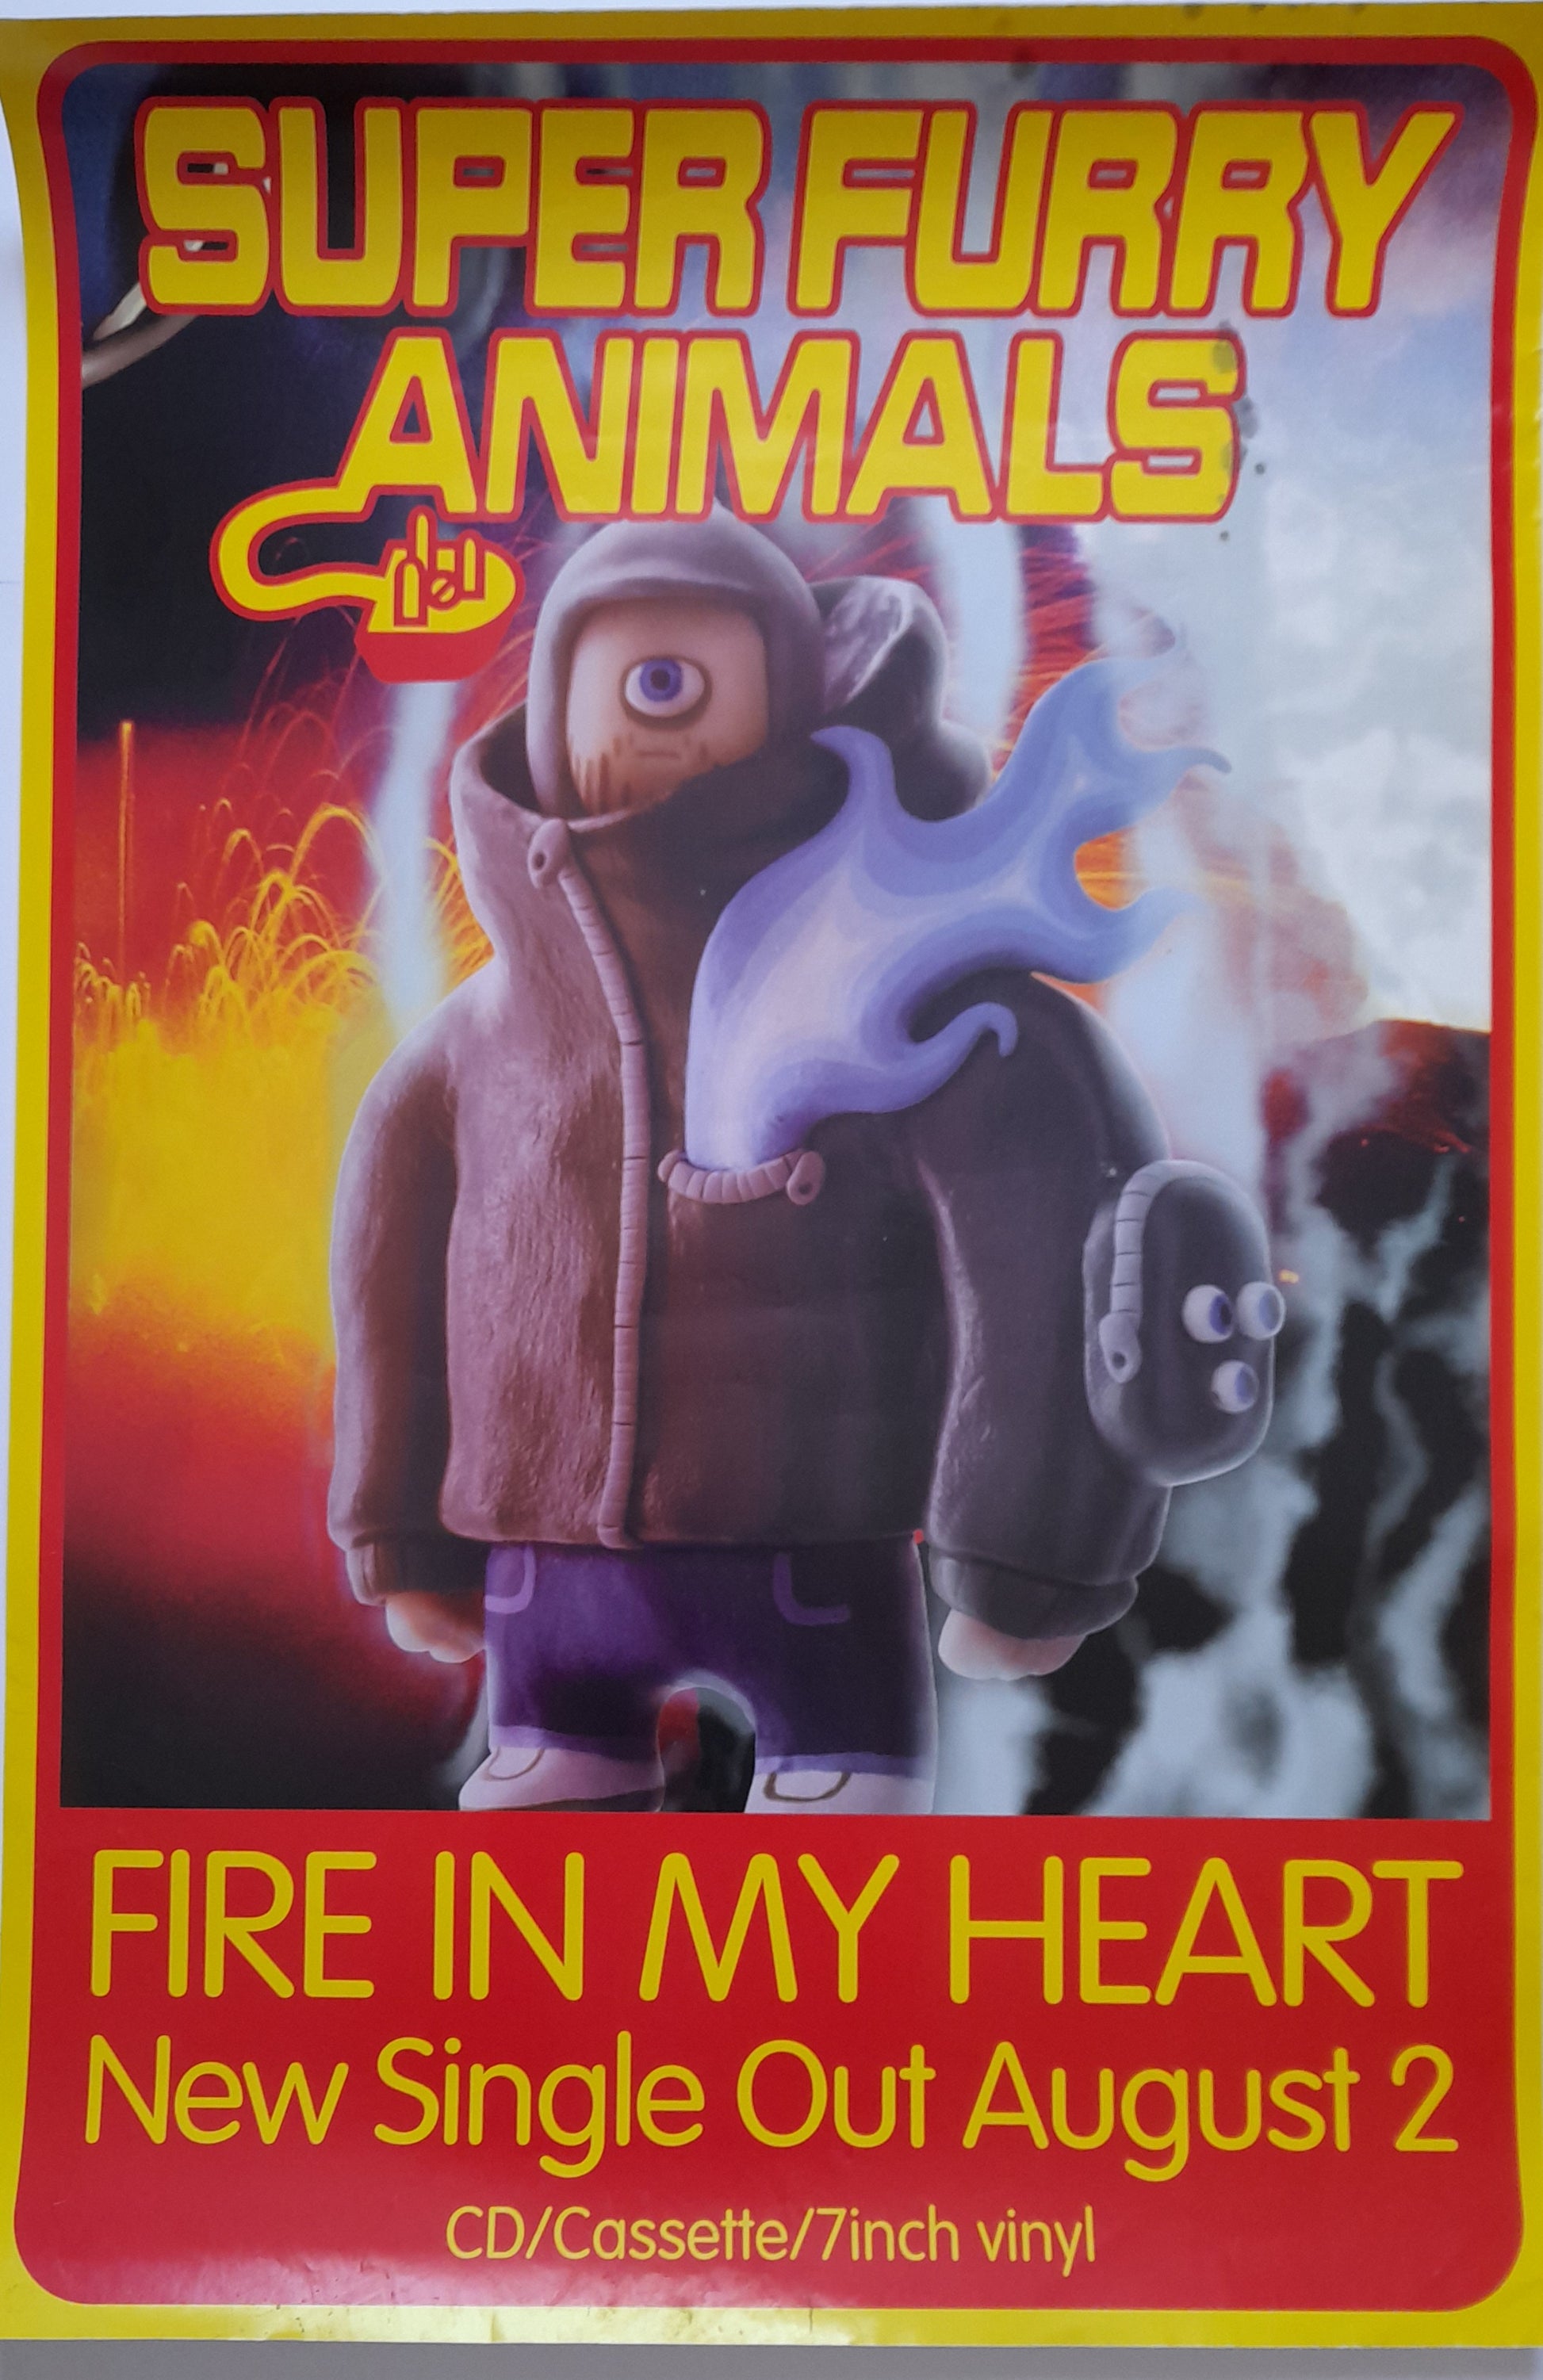 Super Furry Animals Fire in my Heart single UK Promotional Poster